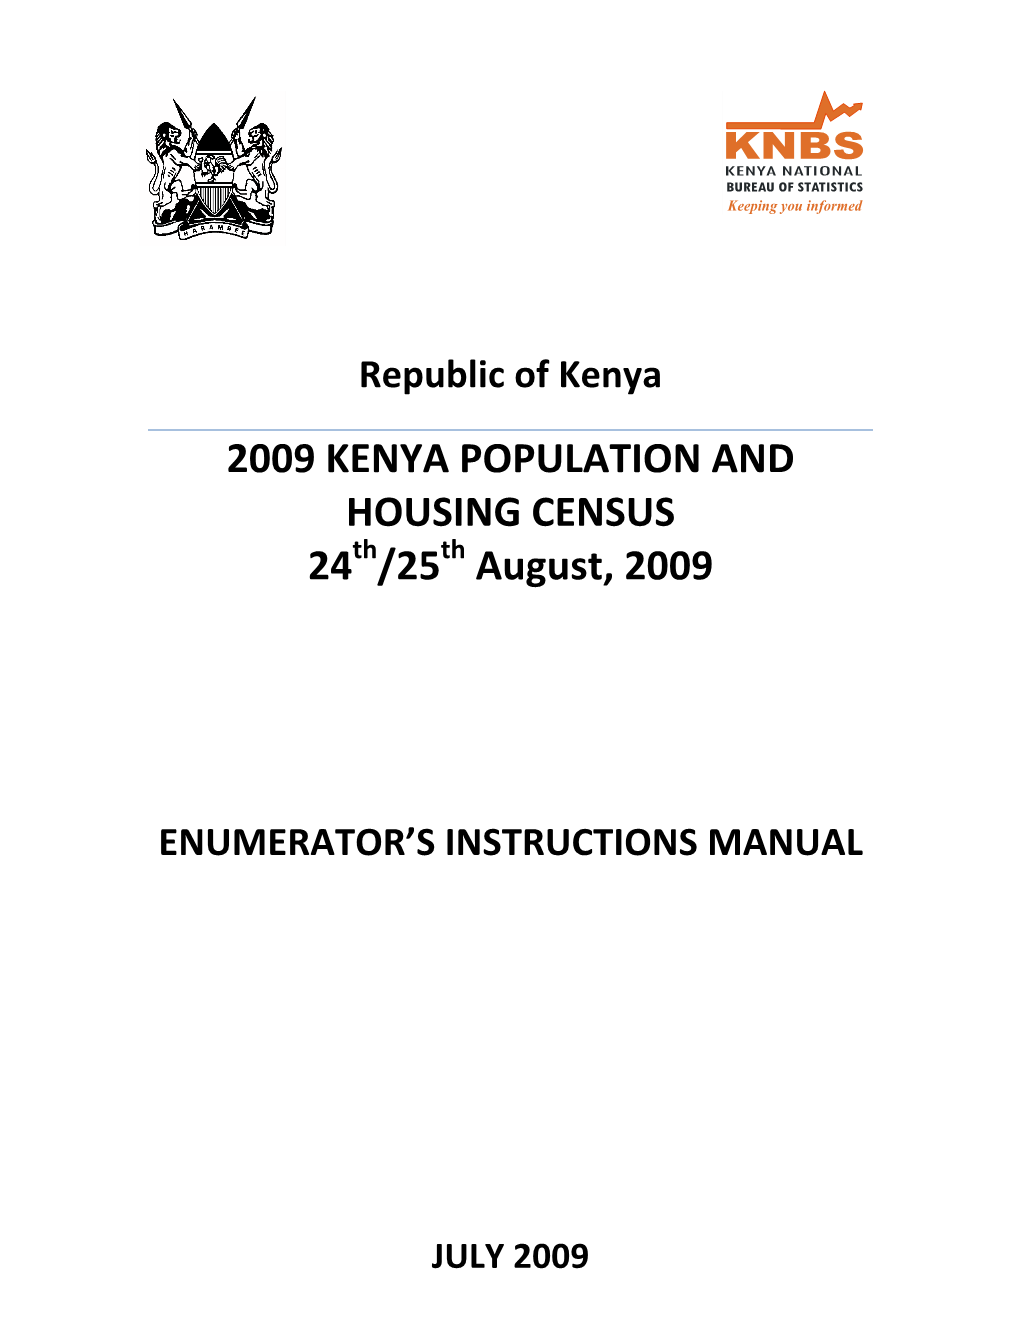 2009 KENYA POPULATION and HOUSING CENSUS 24 /25 August